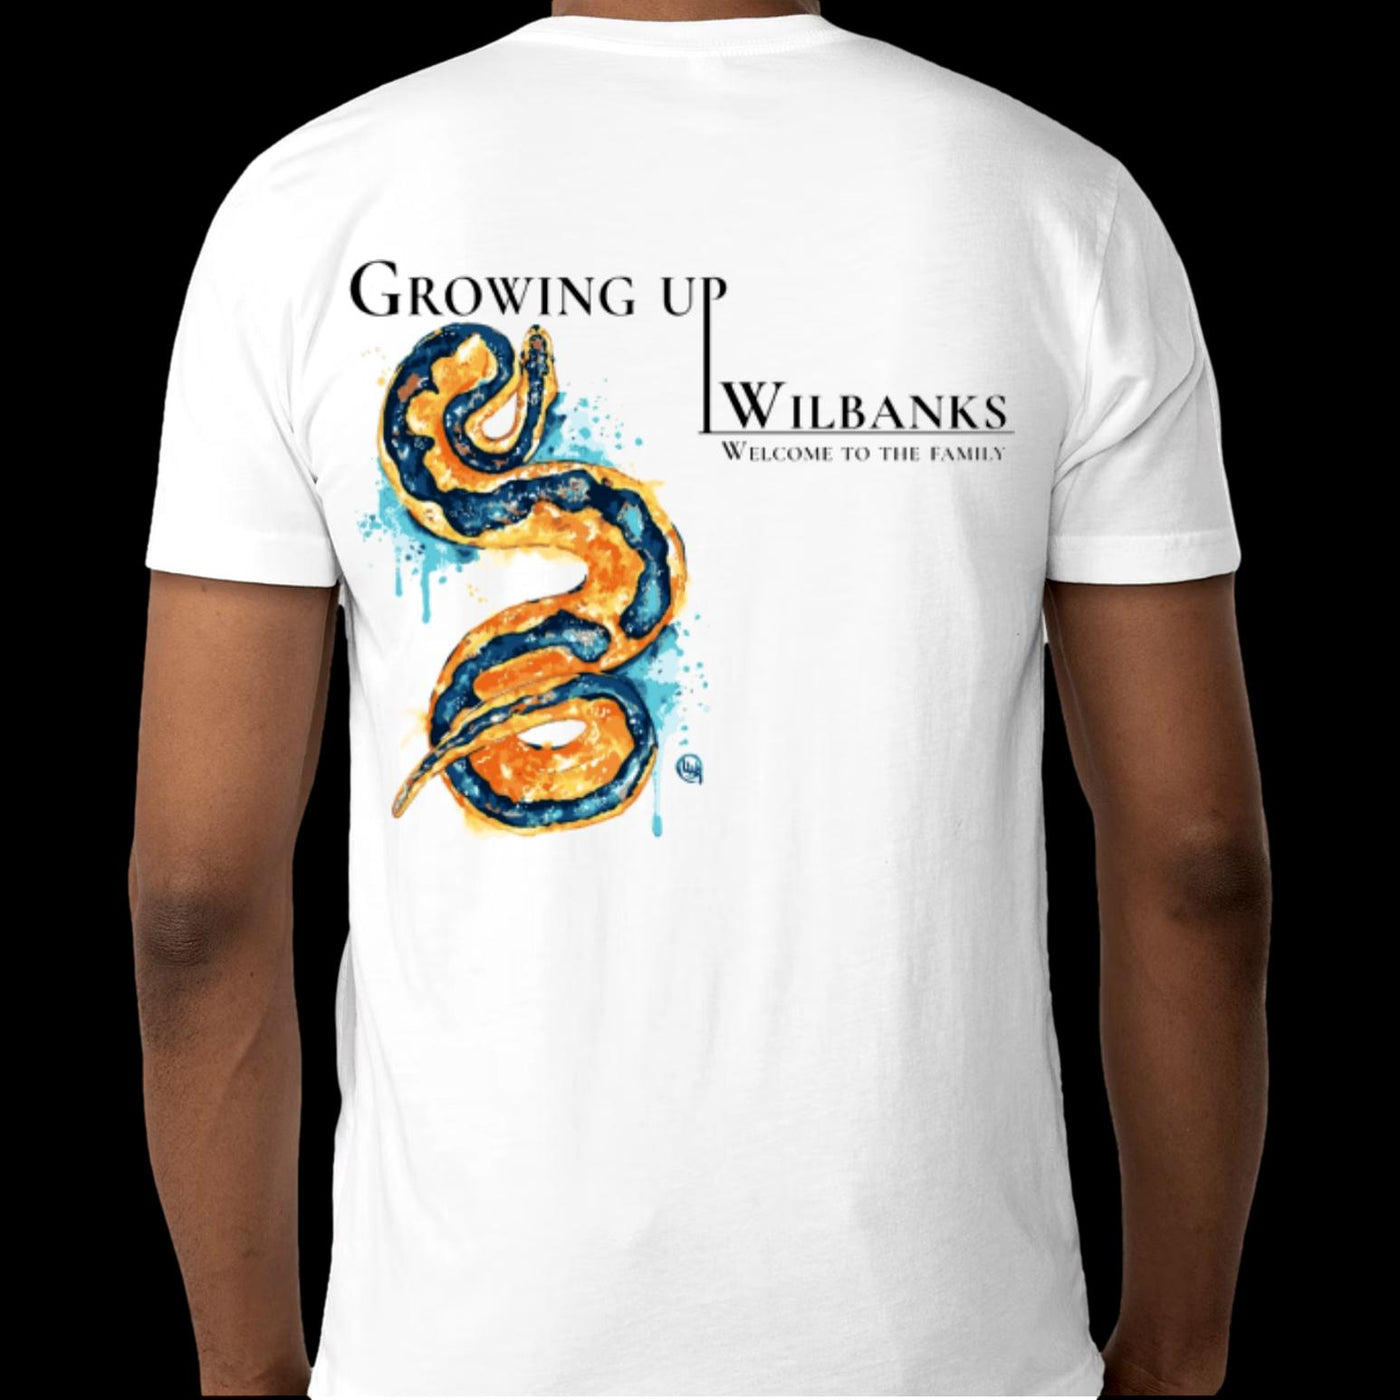 Wilbanks Official "Growing Up Wilbanks" Watercolor Python T Shirt